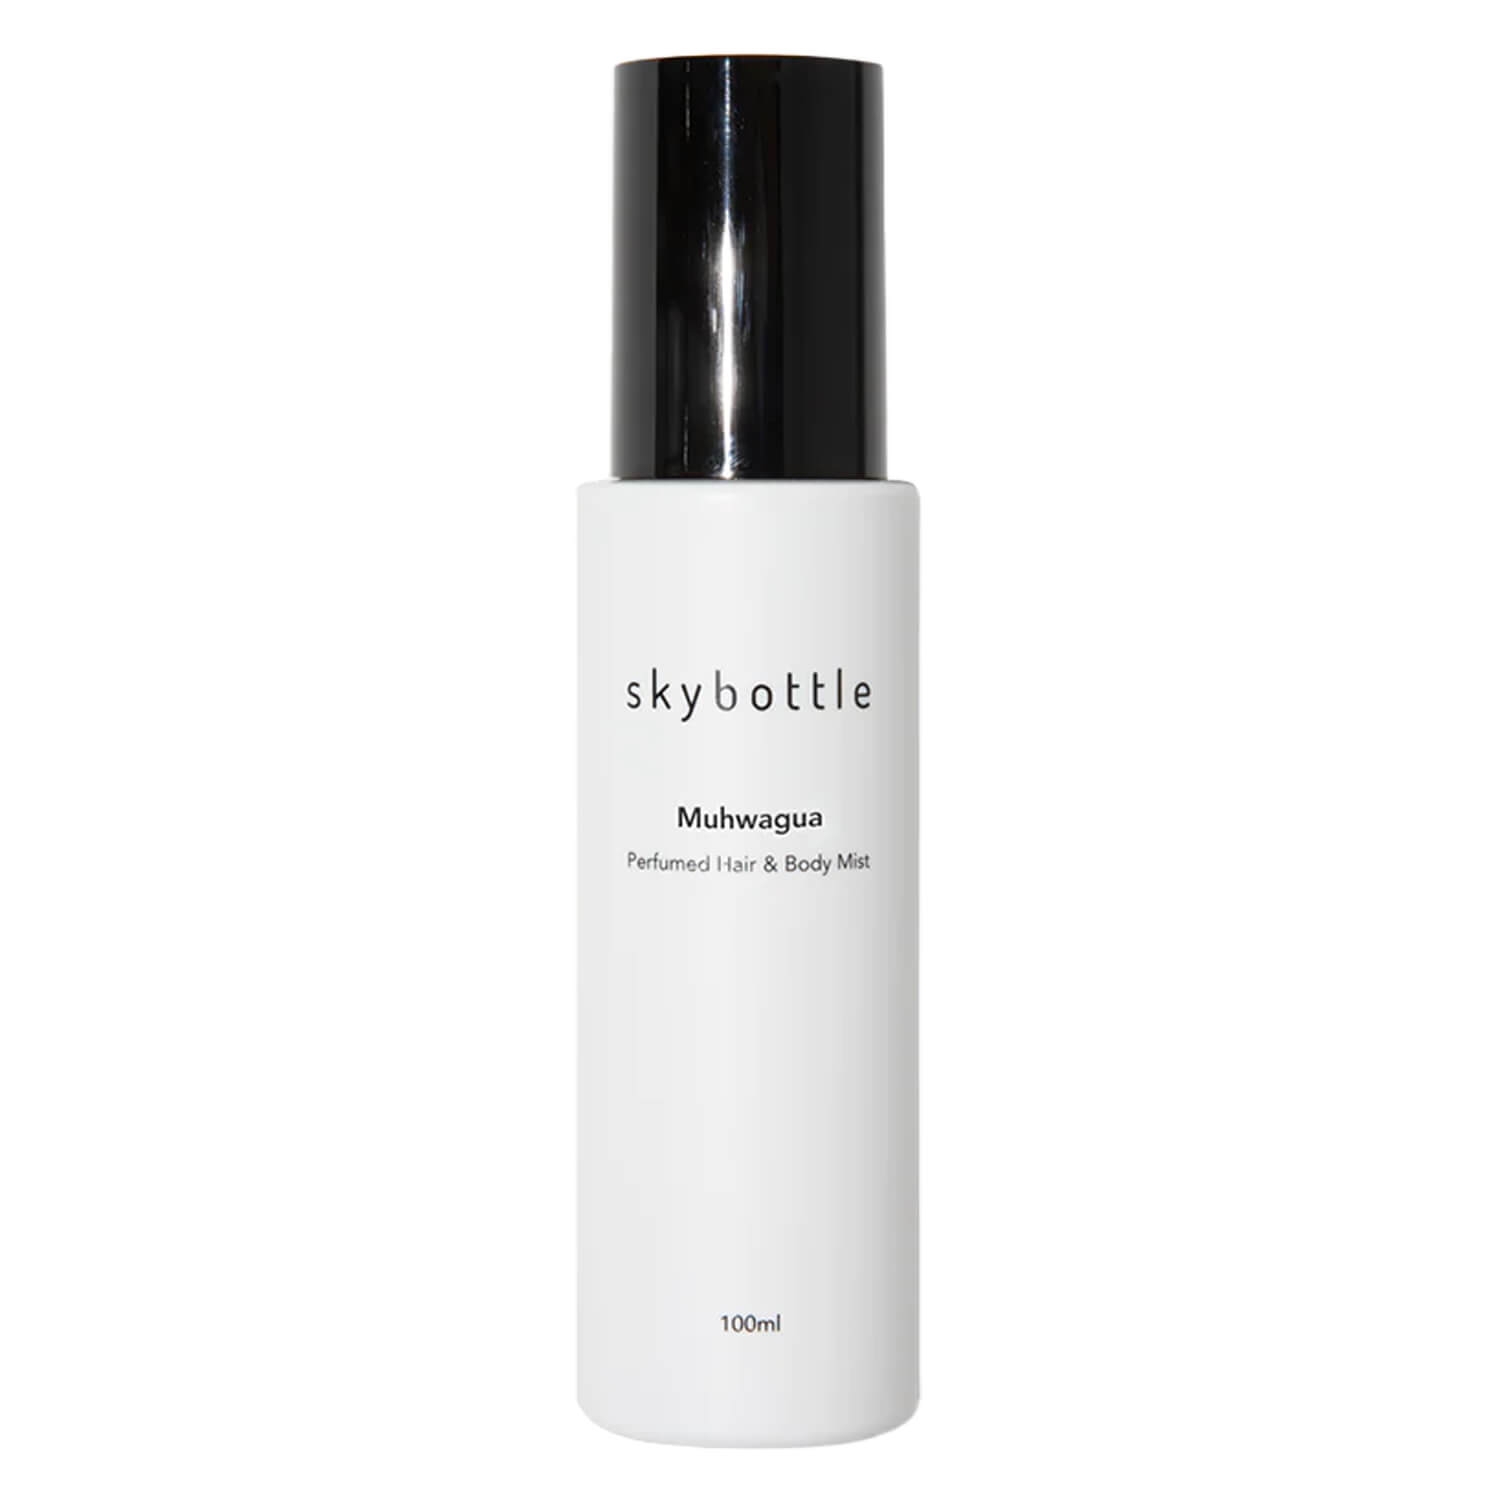 Product image from Skybottle - Muhwagua Perfumed Hair & Body Mist